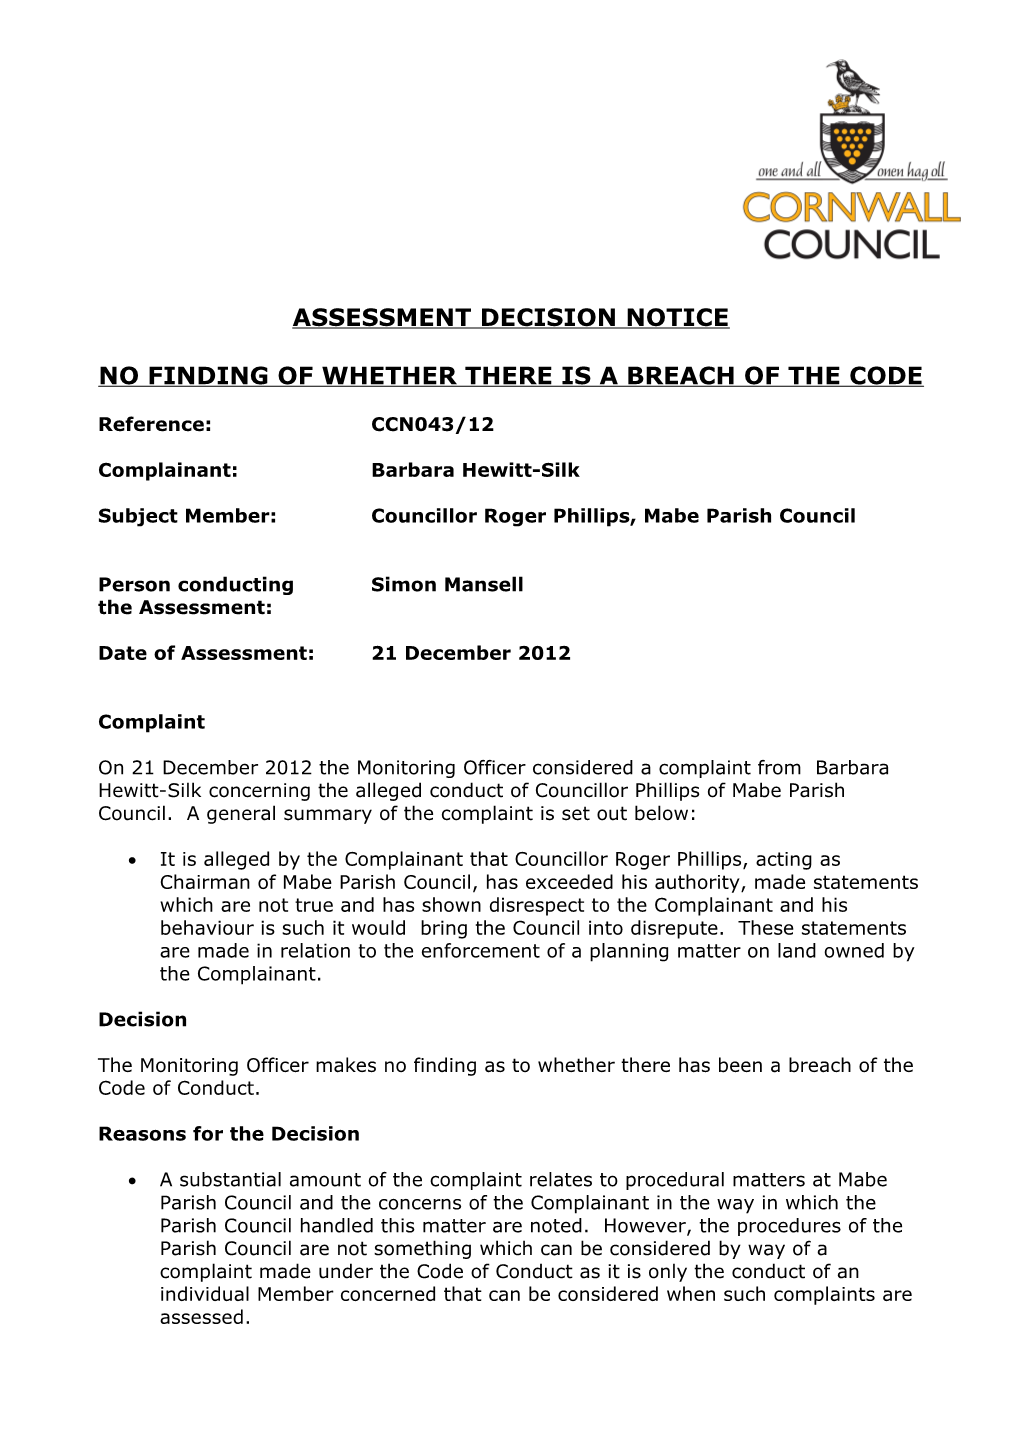 No Finding of Whether There Is a Breach of the Code